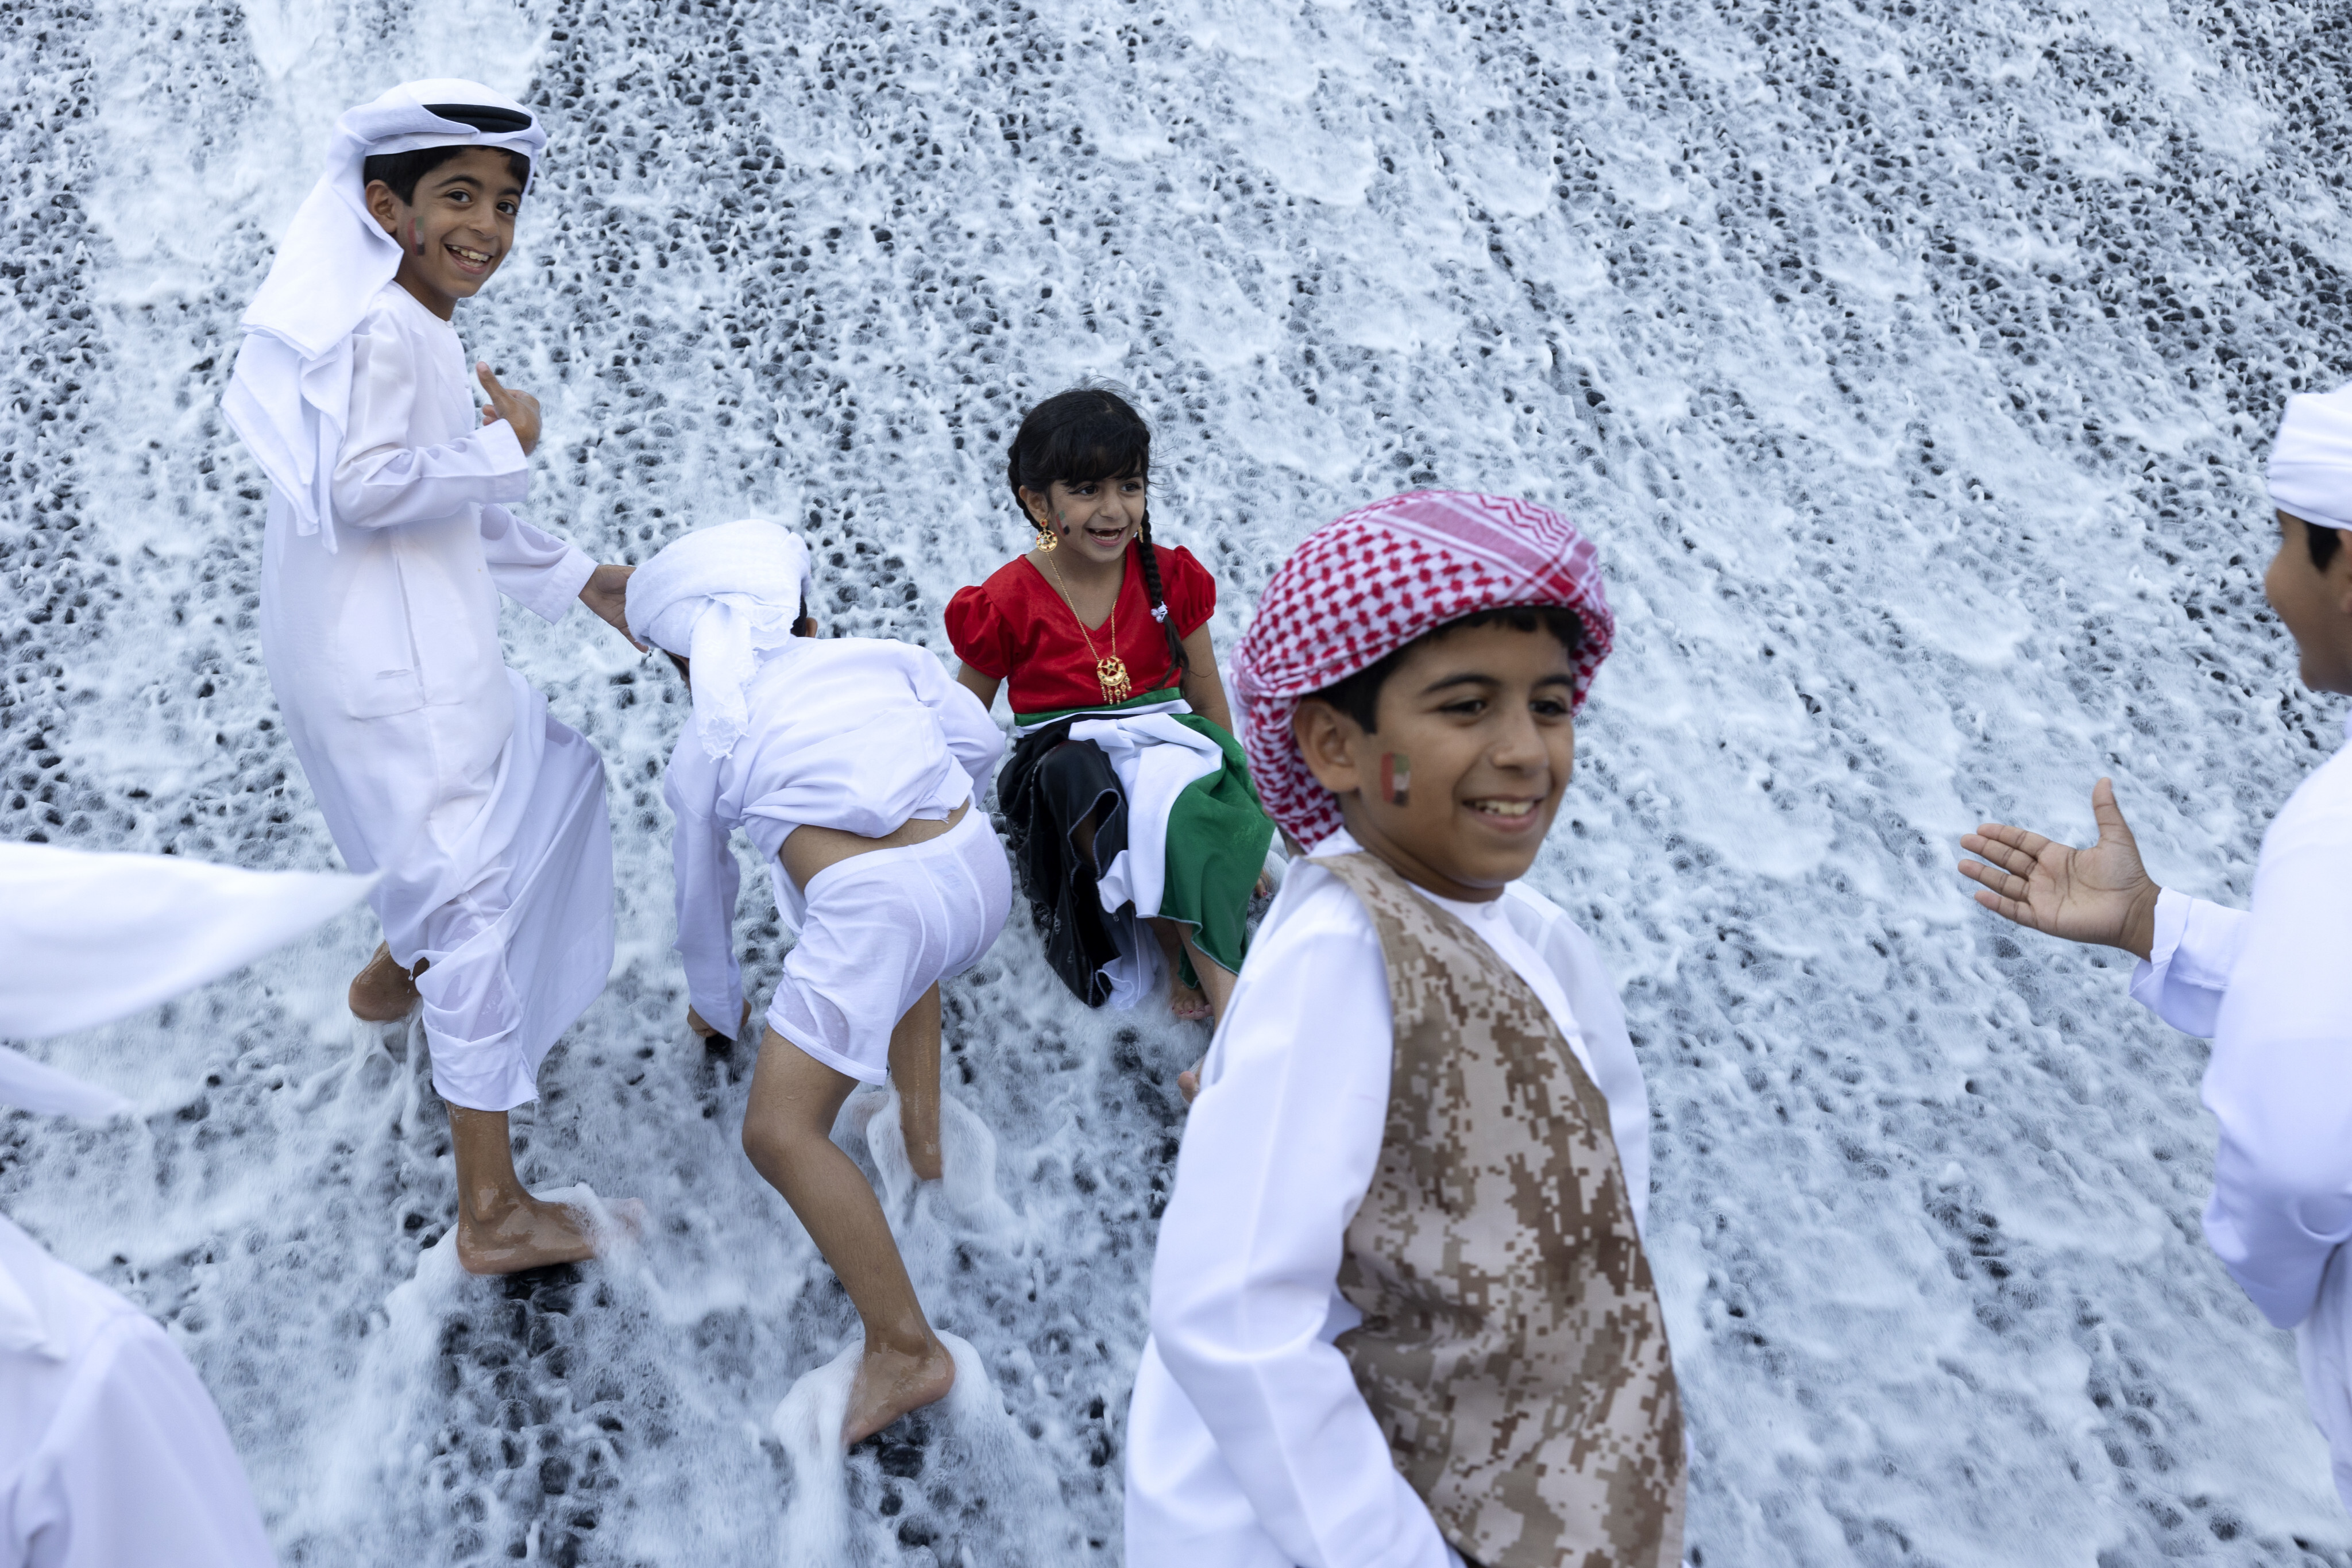 Children play at the Expo 2020 Water Feature during the Expo 2020 Dubai in the United Arab Emirates. Photo: Palani Mohan/Expo 2020 Dubai